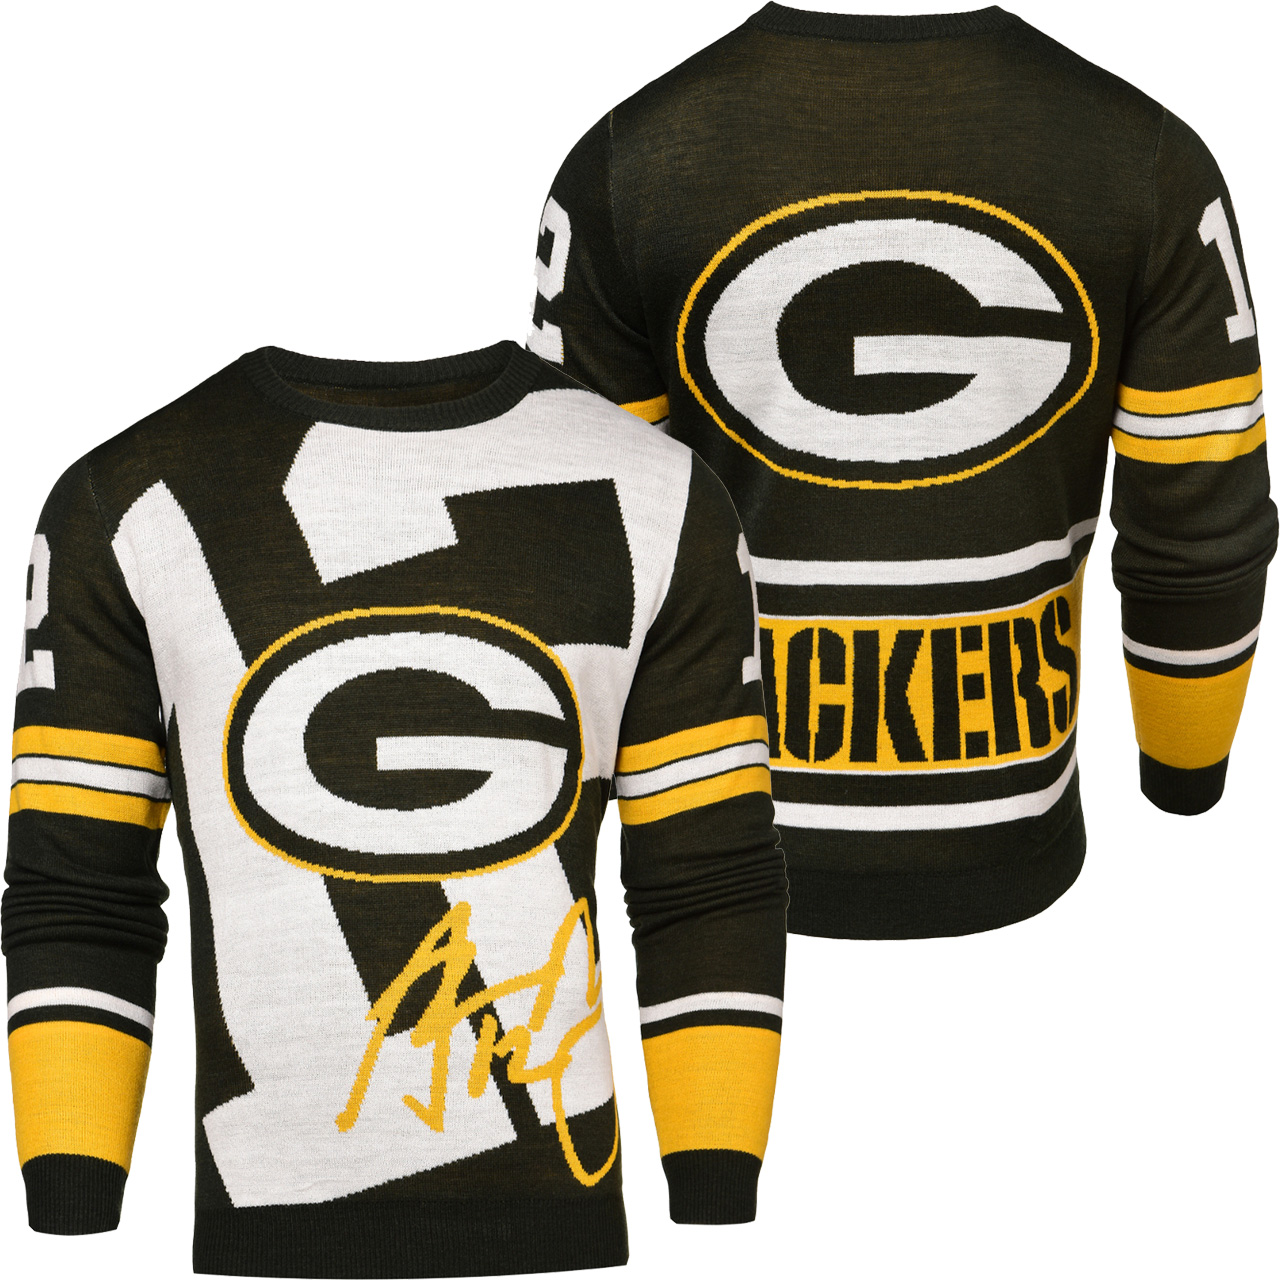 [ AWESOME ] Aaron Rodgers #12 Green Bay Packers NFL Loud Player Sweater – Saleoff 081221